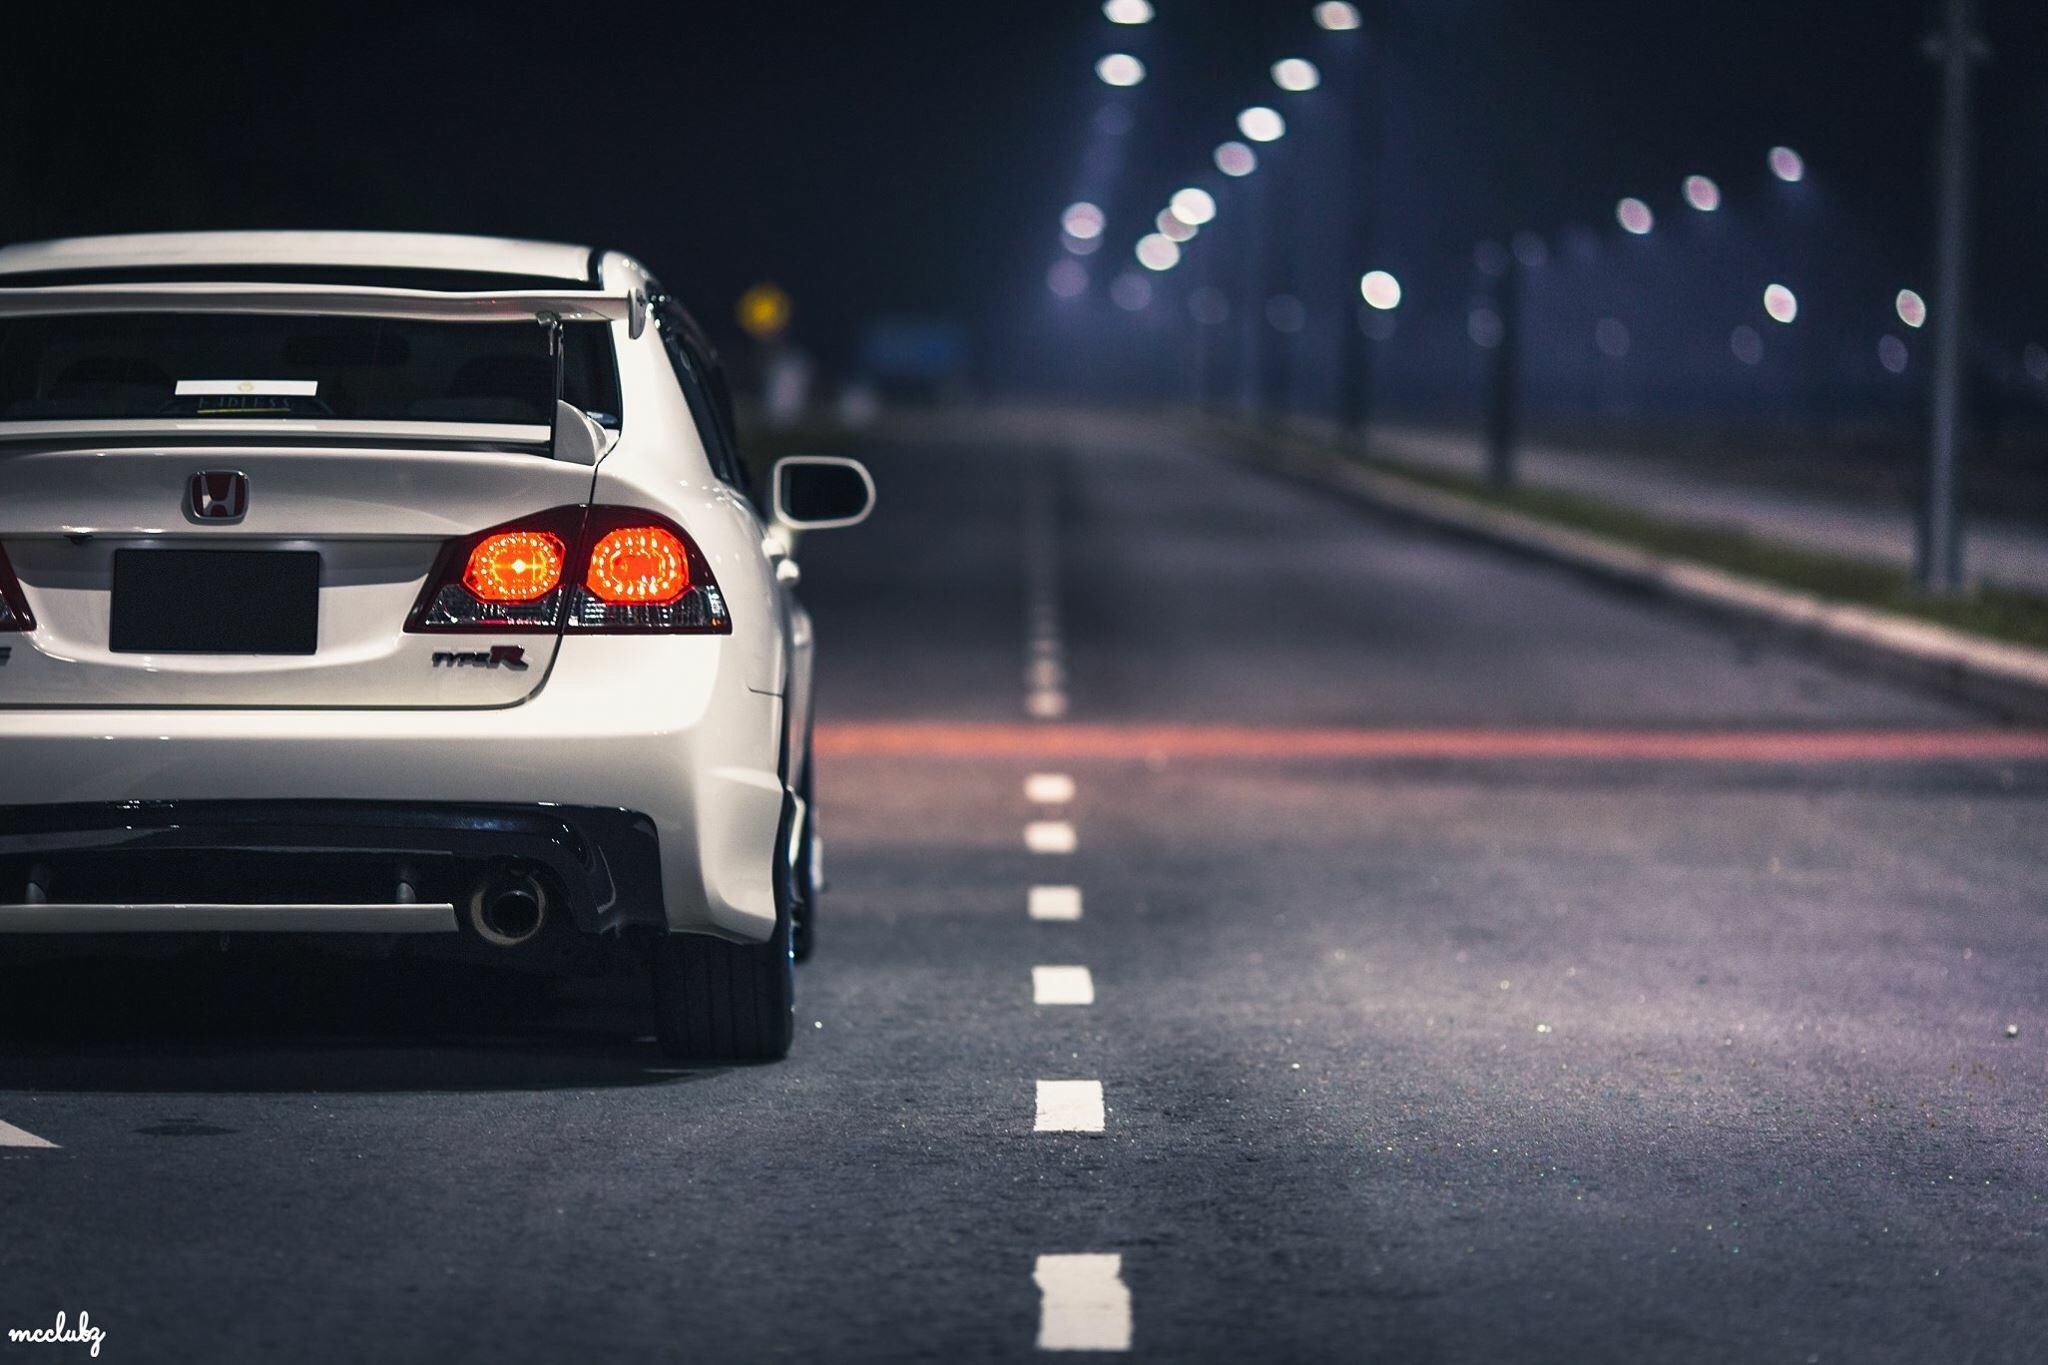 Ten wallpapers of the Honda Civic that will make you go WOW